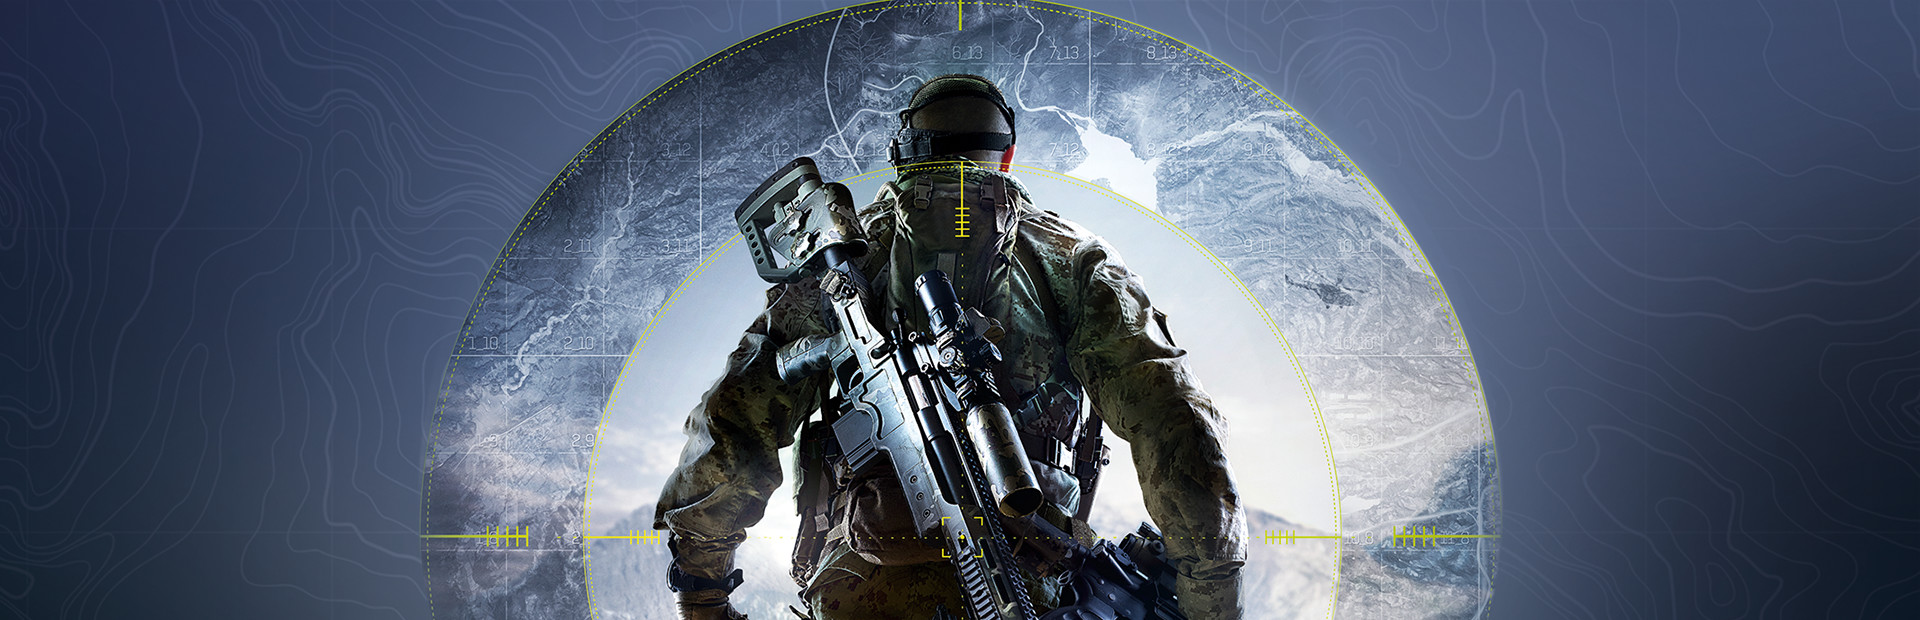 Sniper Ghost Warrior 3 cover image